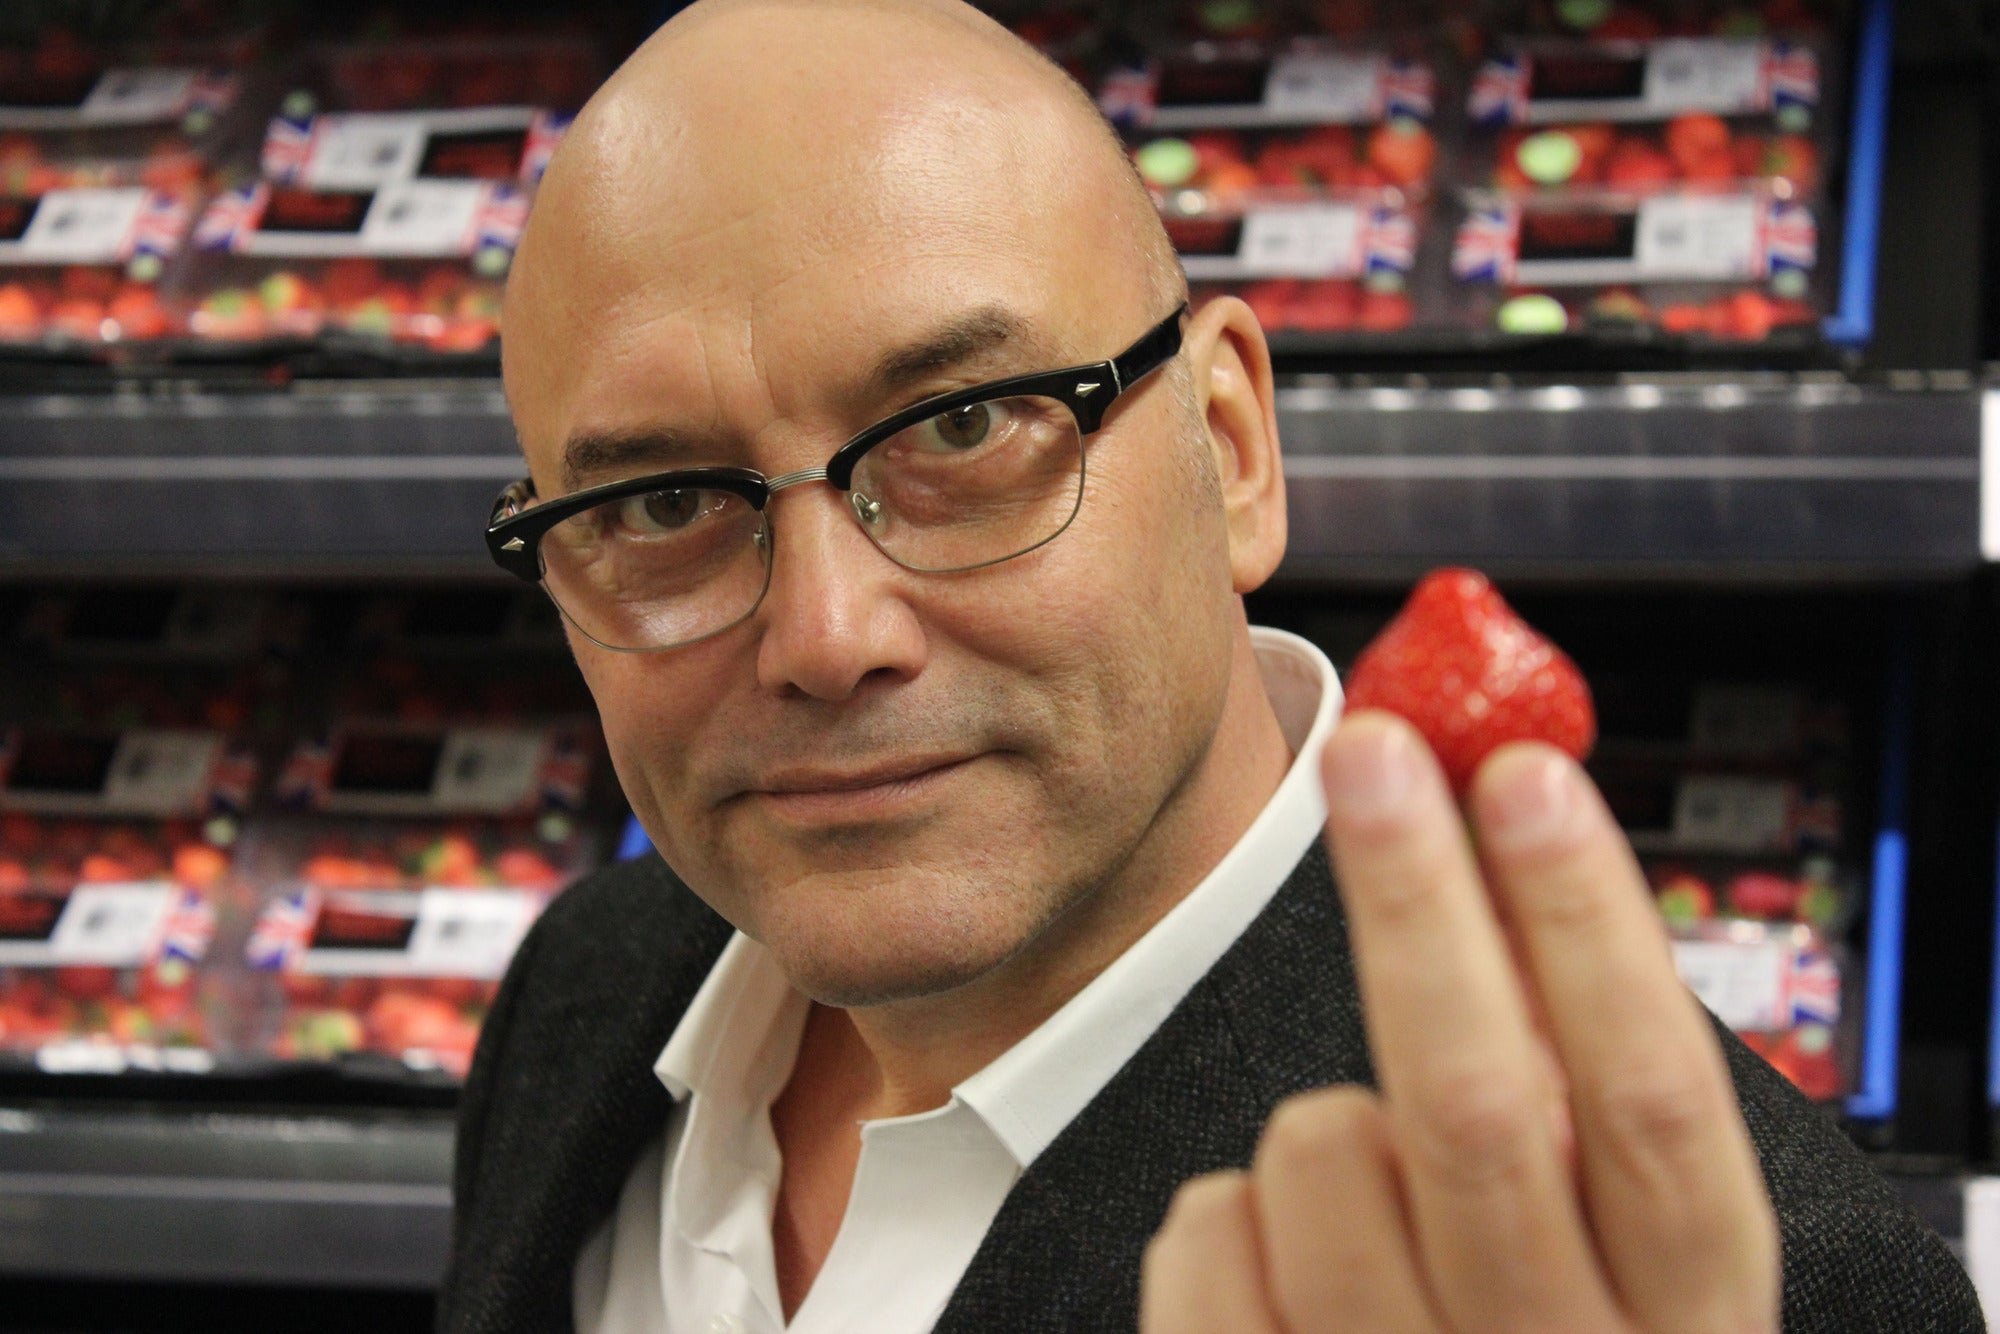 Masterchef's Gregg Wallace was among the last three celebrities to be revealed